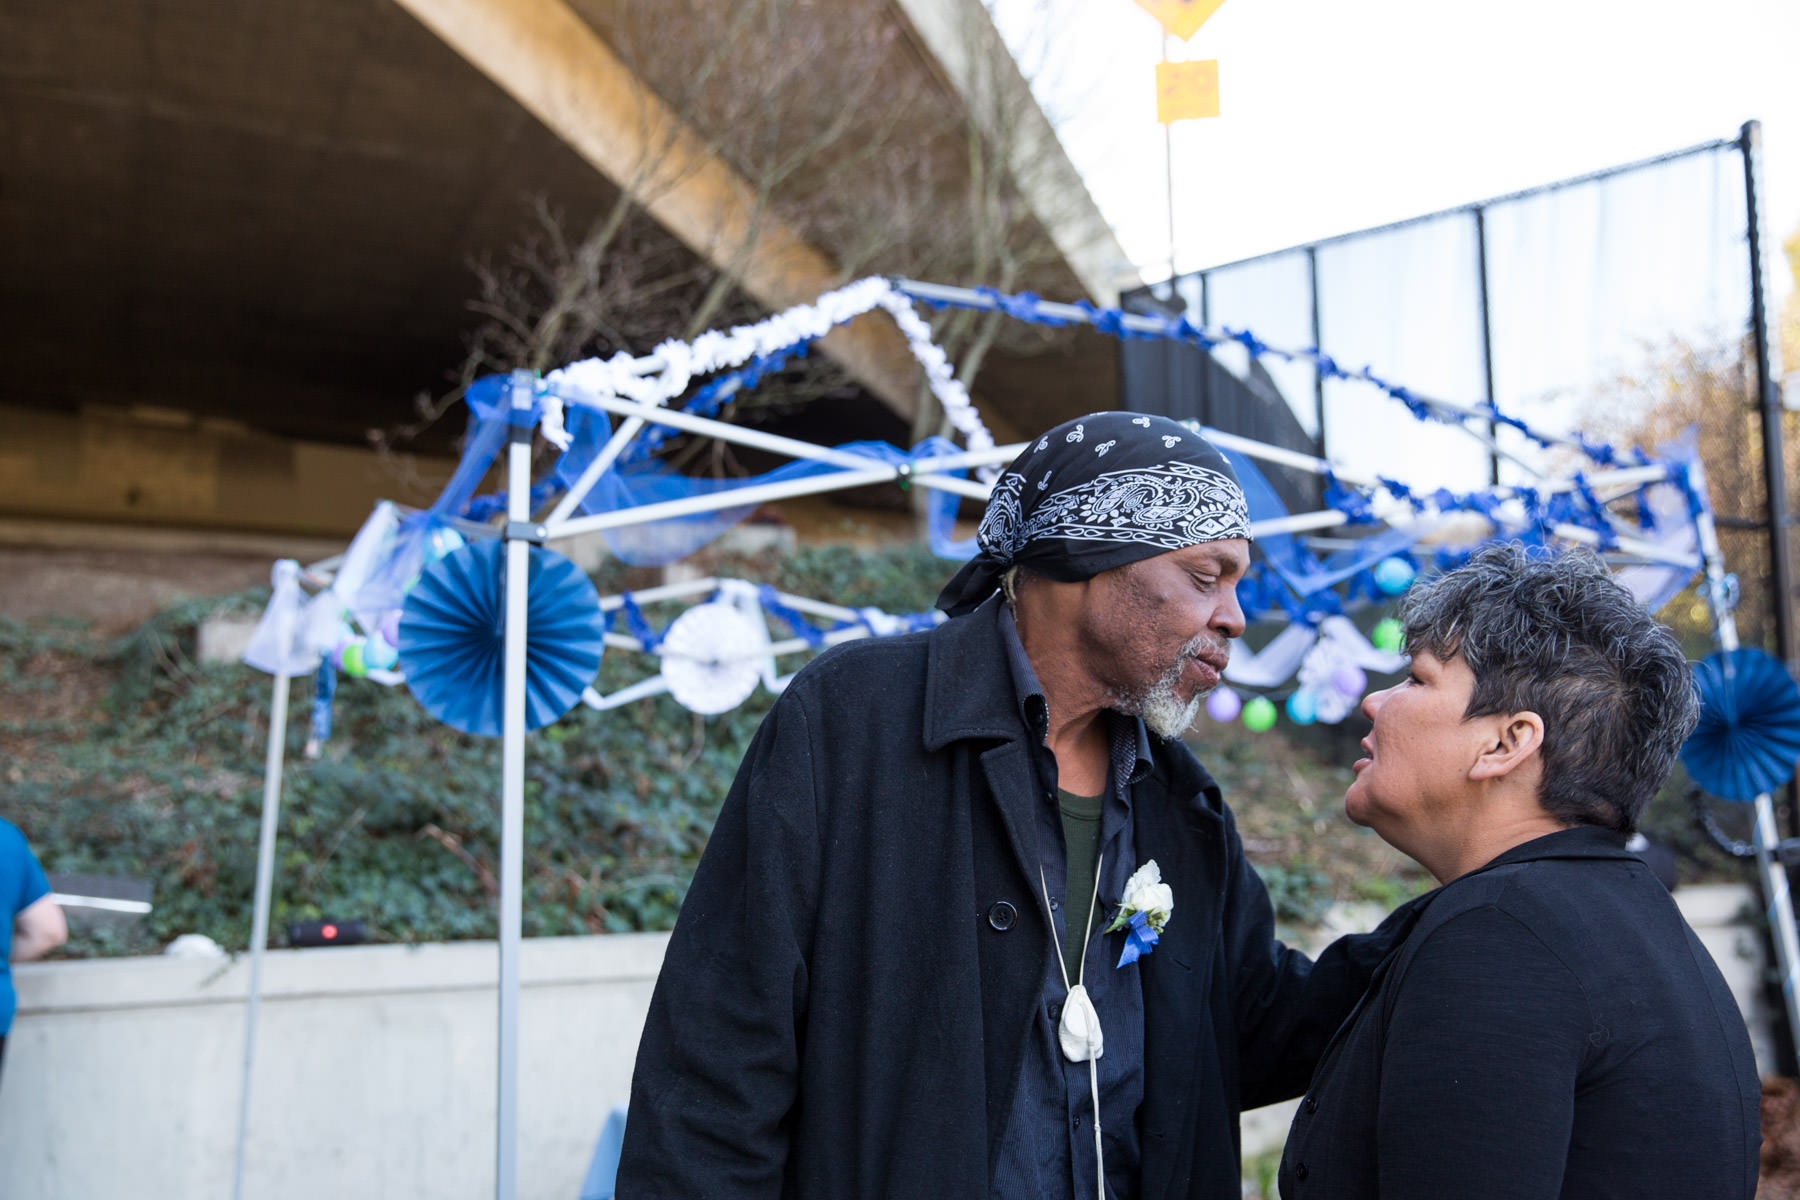 Michelle Vestal and Bob J. Kitcheon, who live in a tent community, share a kiss under the freeway in Seattle, where they married on March 18, 2018....